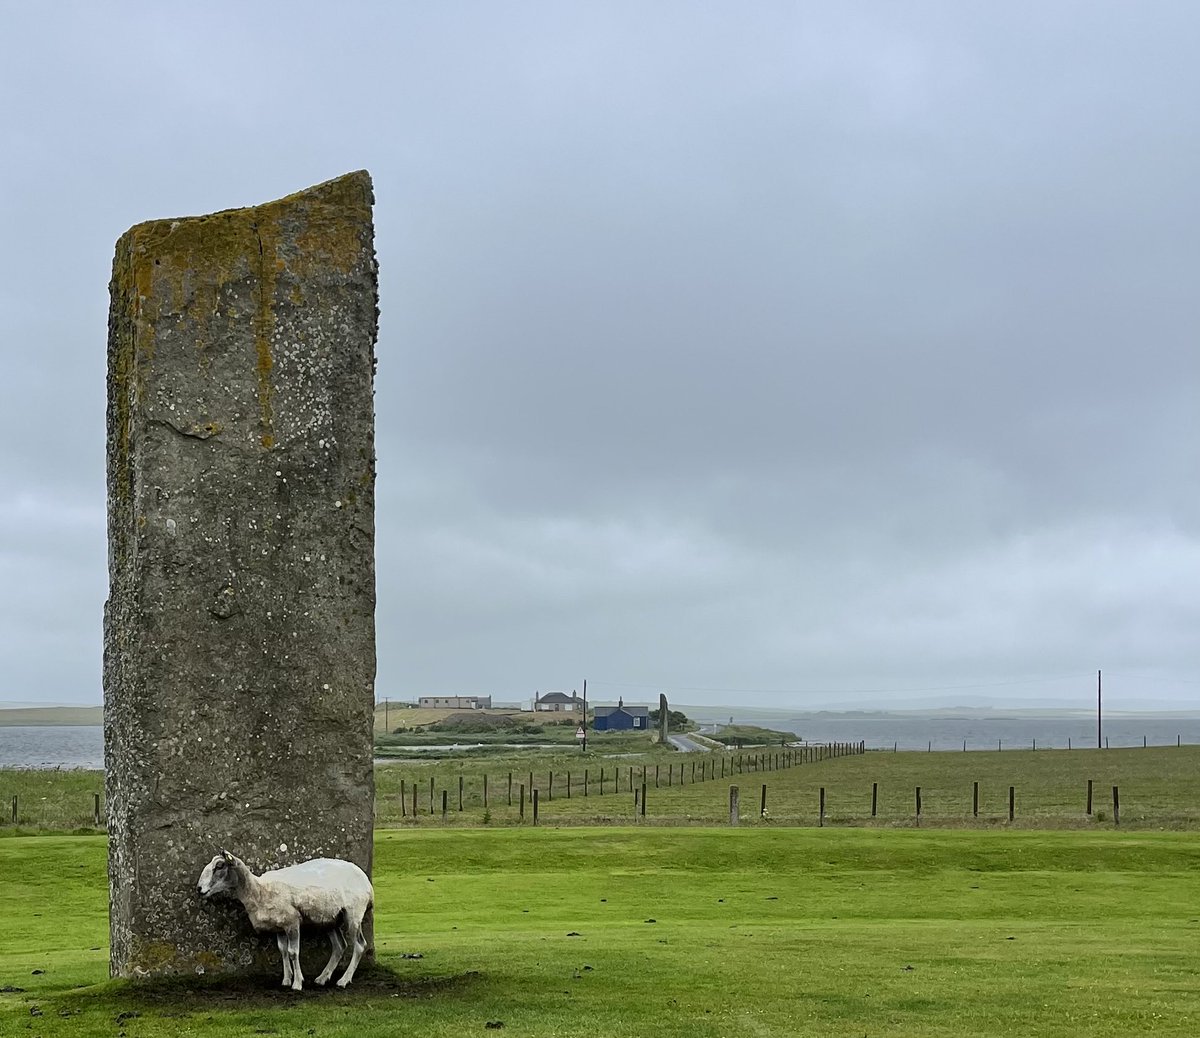 Hiding from the wind blown rains high up in the north. A sheltering sheep on Orkney from earlier this year. Standing stones at Stenness for #StandingStonesSunday